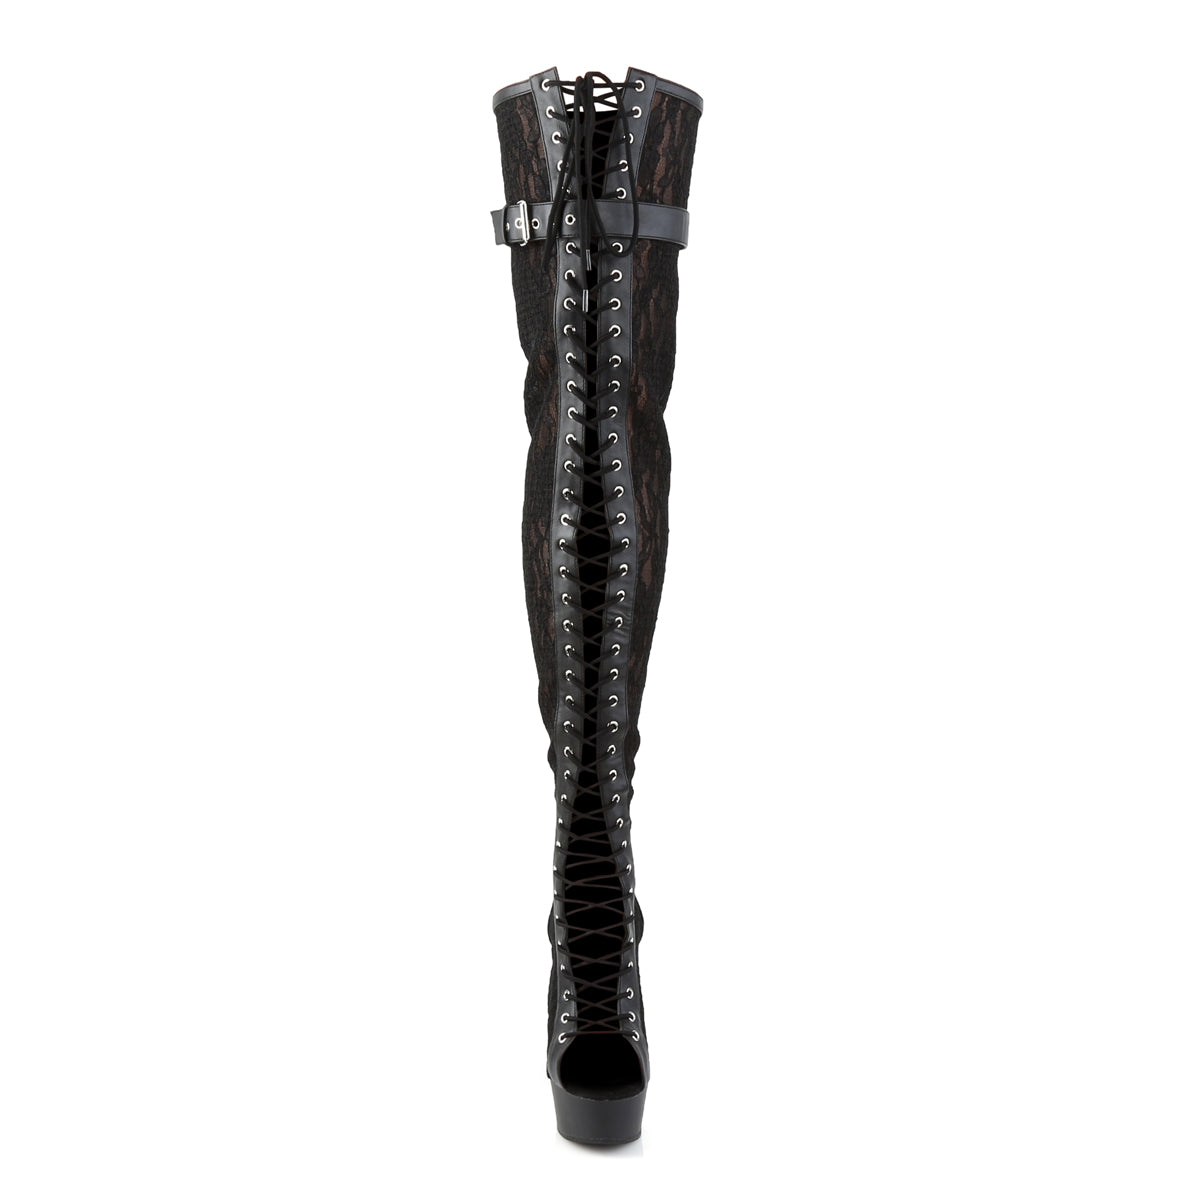 DELIGHT-3025ML Black Thigh High Boots